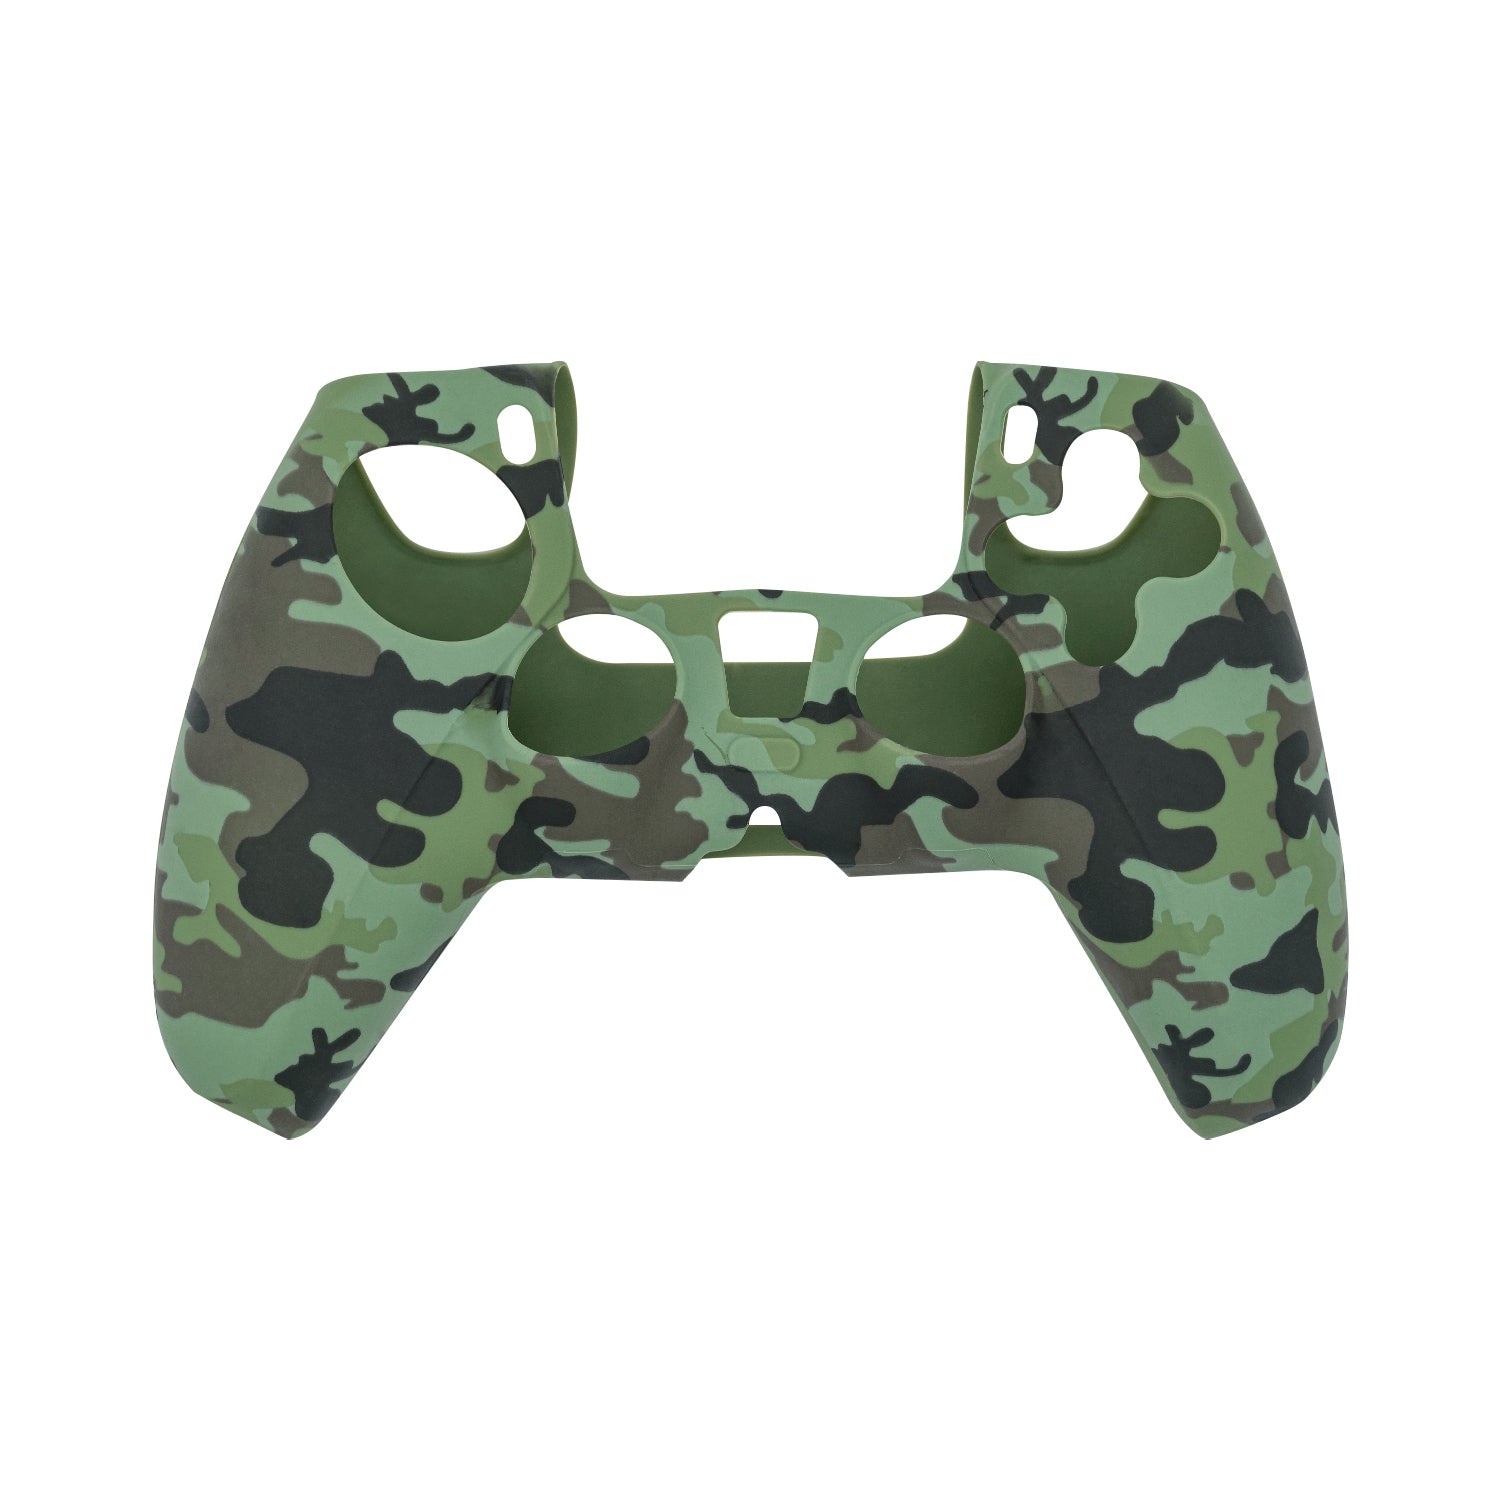 PS5 Playstation 5 Silicone Rubber Skin - Camo Skull Protective Controller  Cover